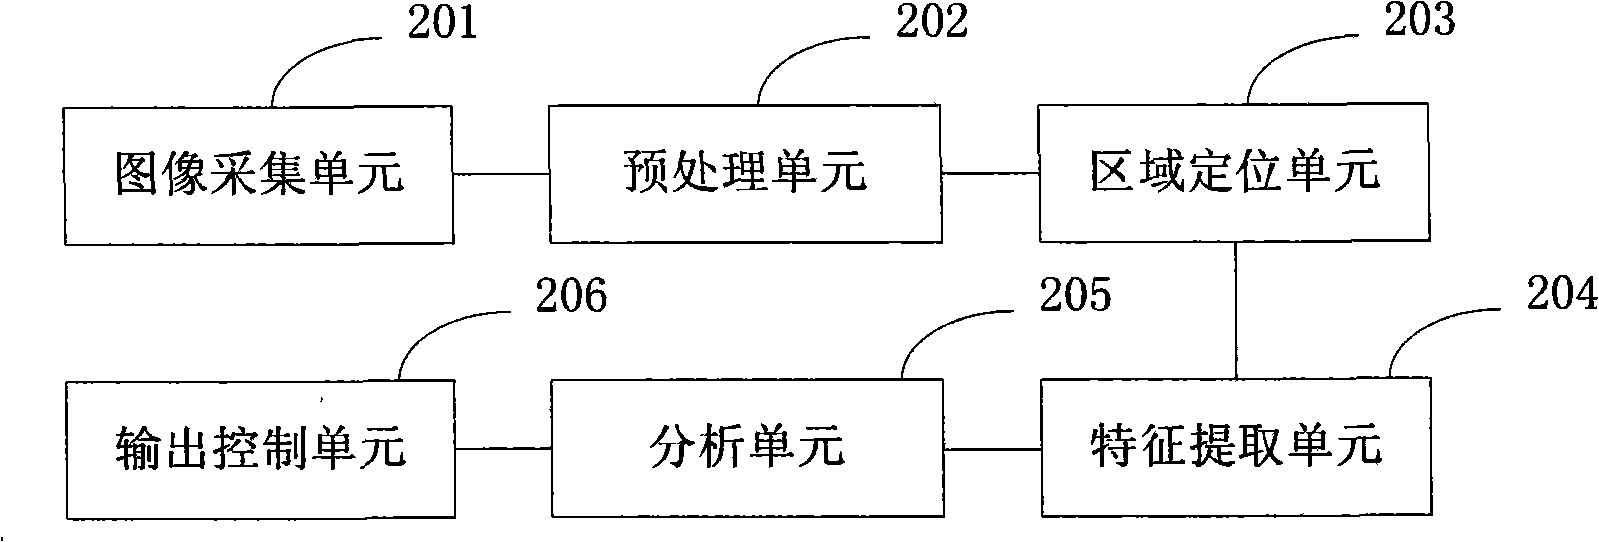 Embedded high-speed on-line machine vision detection method and device